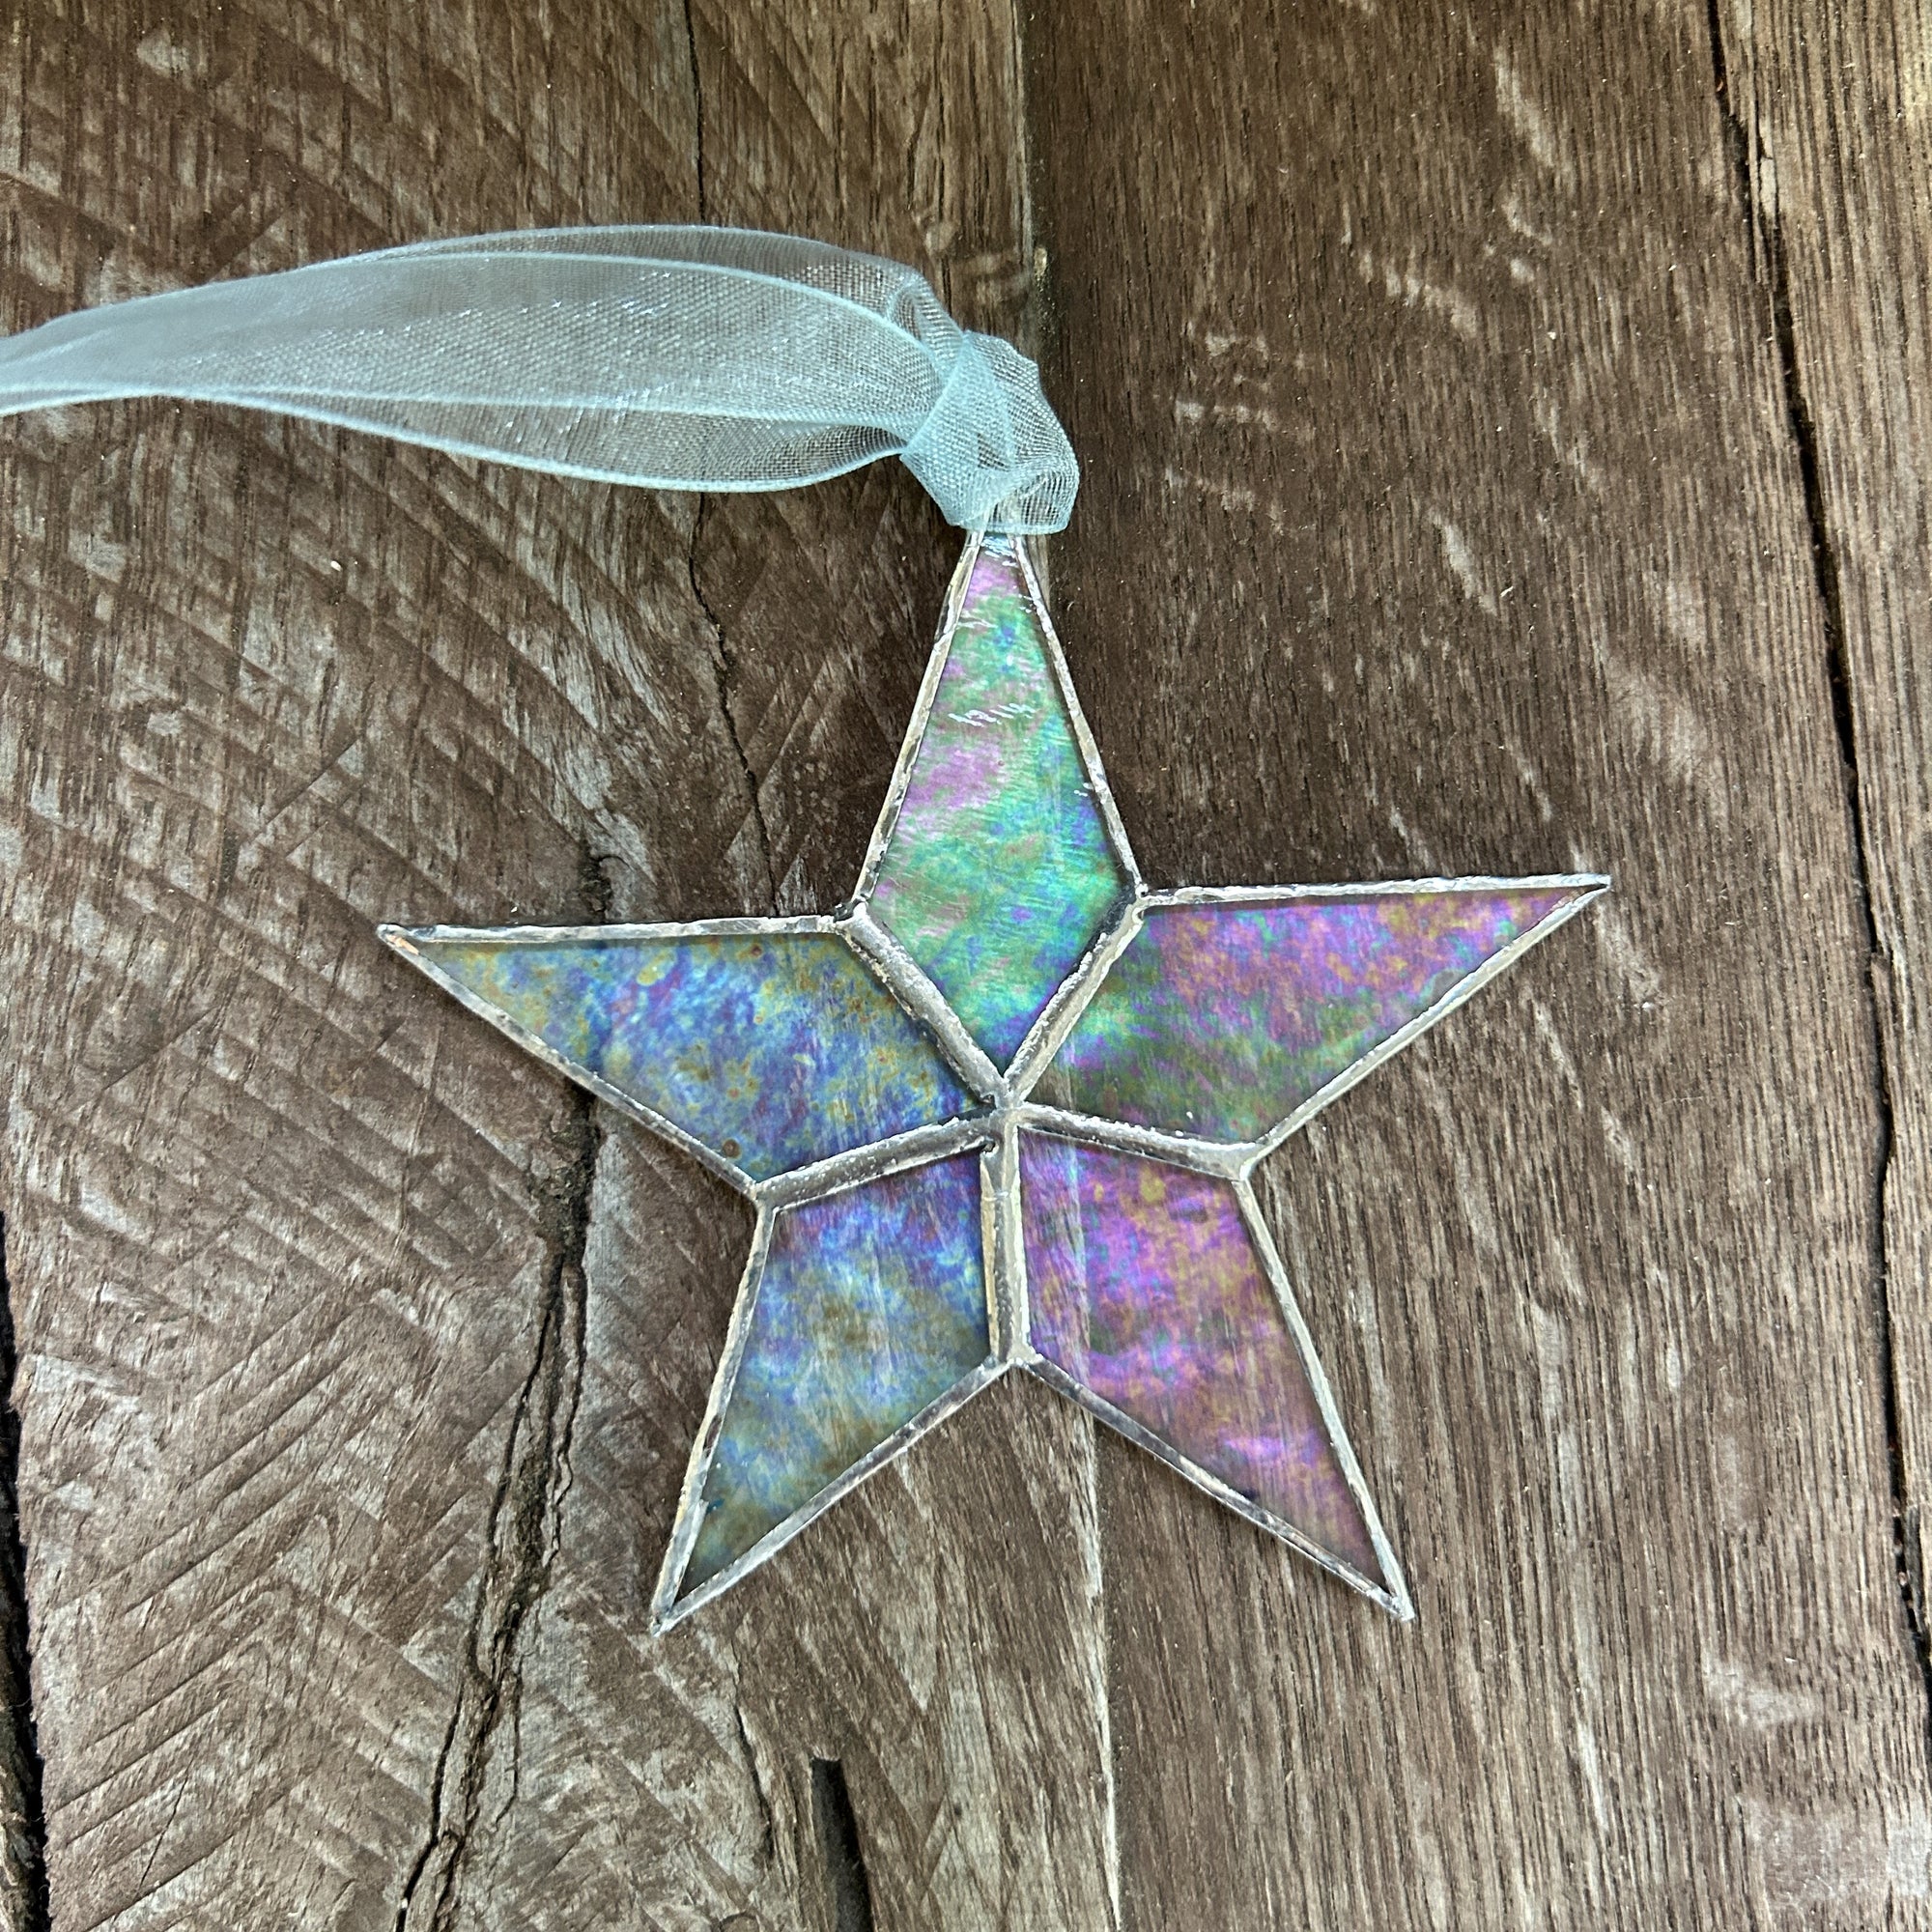 Handmade Stained Glass Star Gifts